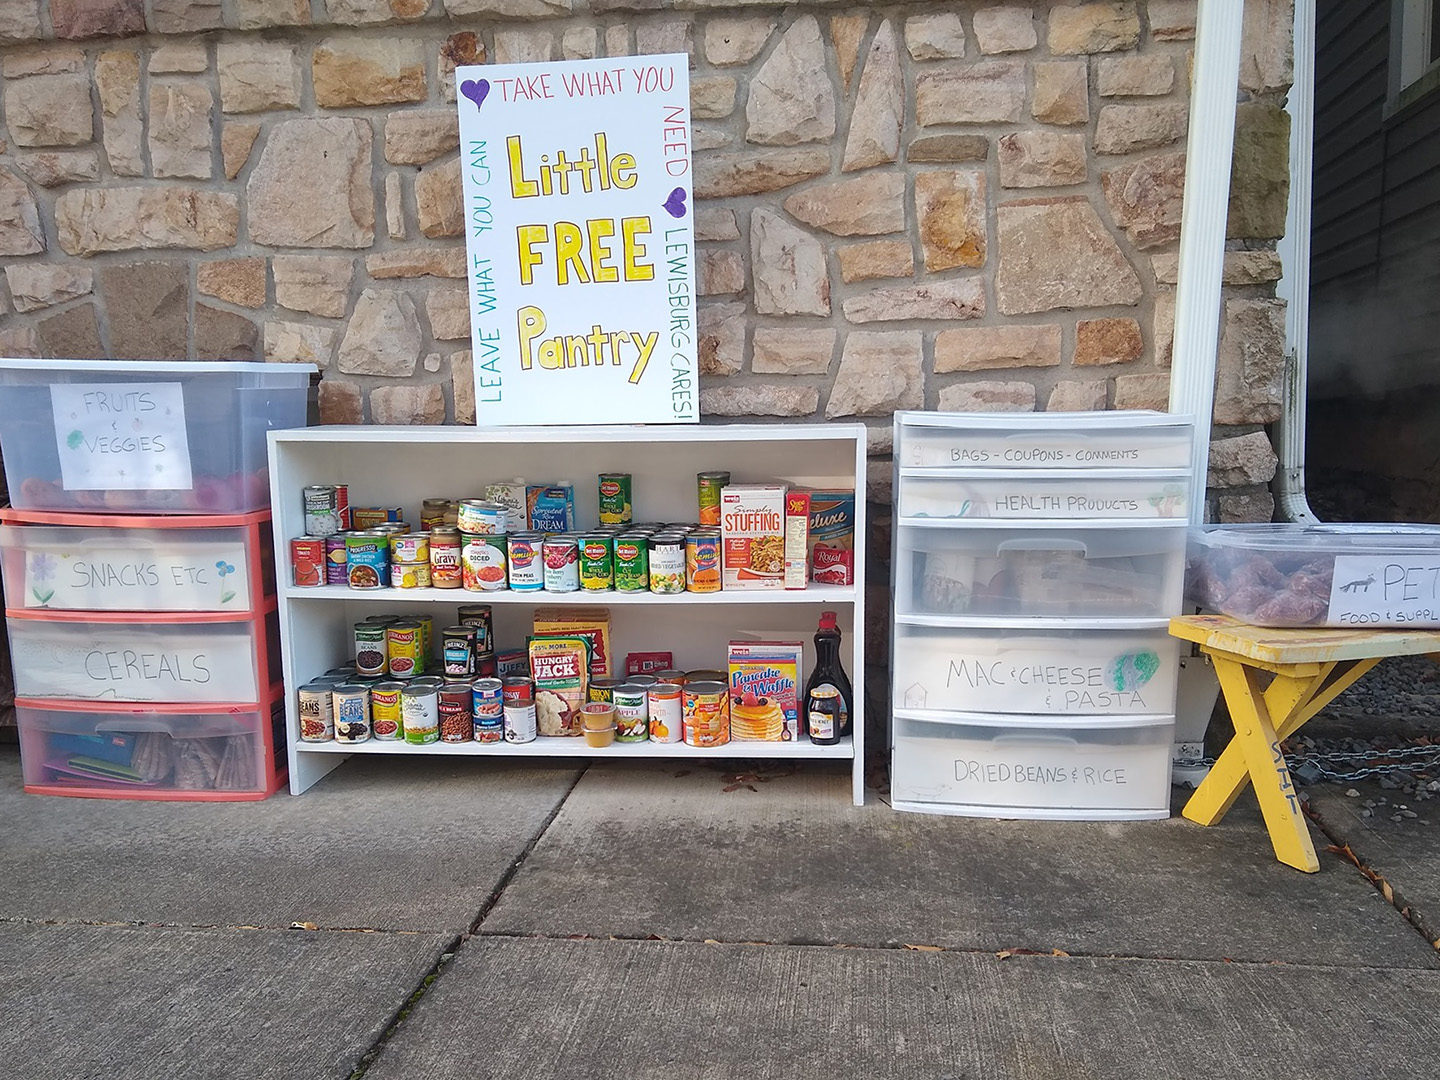 Lewisburg PA’s Little Free Pantry